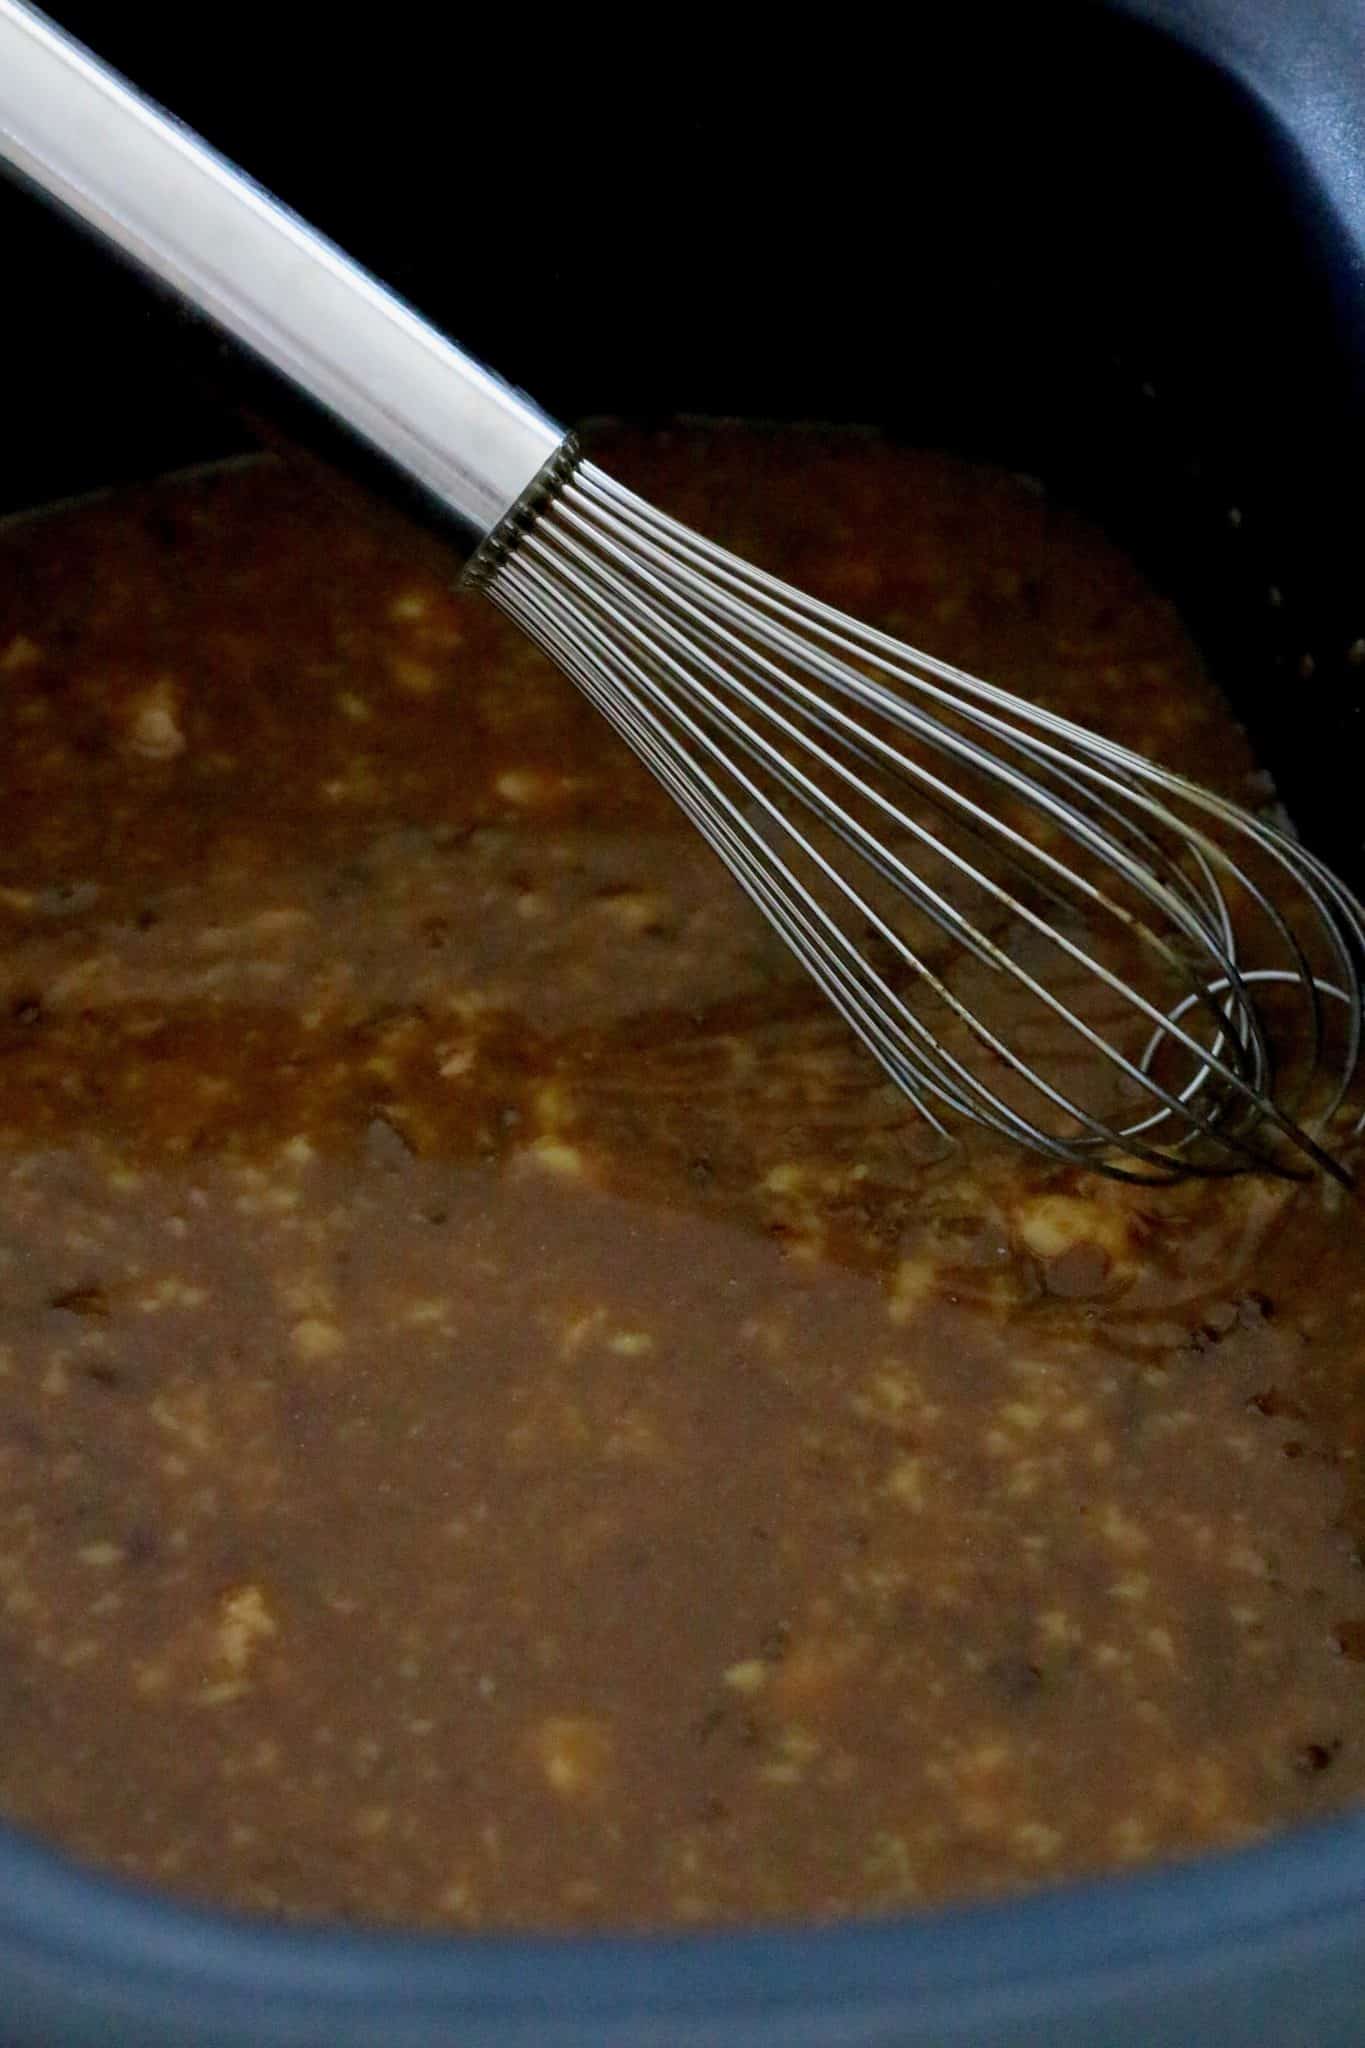 French onion soup, au jus gravy, cream of chicken whisked together in a slow cooker.